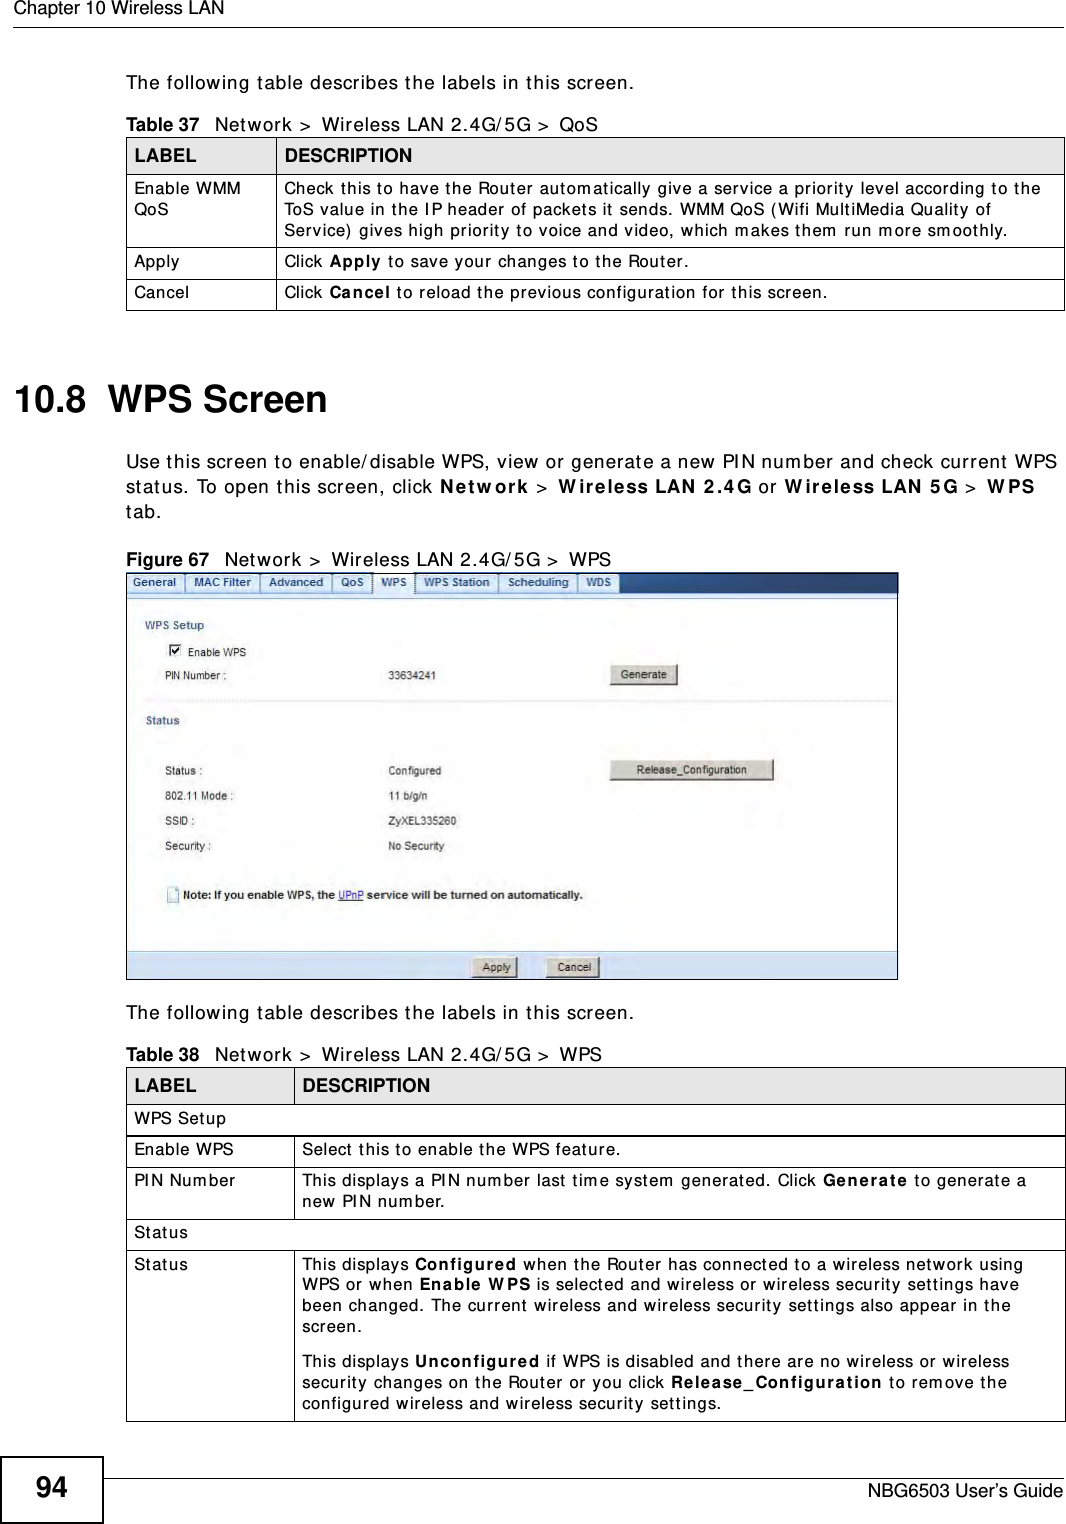 Chapter 10 Wireless LANNBG6503 User’s Guide94The following table describes the labels in this screen. 10.8  WPS ScreenUse this screen to enable/disable WPS, view or generate a new PIN number and check current WPS status. To open this screen, click Network &gt; Wireless LAN 2.4G or Wireless LAN 5G &gt; WPS tab.Figure 67   Network &gt; Wireless LAN 2.4G/5G &gt; WPSThe following table describes the labels in this screen.Table 37   Network &gt; Wireless LAN 2.4G/5G &gt; QoSLABEL DESCRIPTIONEnable WMM QoS Check this to have the Router automatically give a service a priority level according to the ToS value in the IP header of packets it sends. WMM QoS (Wifi MultiMedia Quality of Service) gives high priority to voice and video, which makes them run more smoothly.Apply Click Apply to save your changes to the Router.Cancel Click Cancel to reload the previous configuration for this screen.Table 38   Network &gt; Wireless LAN 2.4G/5G &gt; WPSLABEL DESCRIPTIONWPS SetupEnable WPS Select this to enable the WPS feature.PIN Number This displays a PIN number last time system generated. Click Generate to generate a new PIN number.StatusStatus This displays Configured when the Router has connected to a wireless network using WPS or when Enable WPS is selected and wireless or wireless security settings have been changed. The current wireless and wireless security settings also appear in the screen.This displays Unconfigured if WPS is disabled and there are no wireless or wireless security changes on the Router or you click Release_Configuration to remove the configured wireless and wireless security settings.